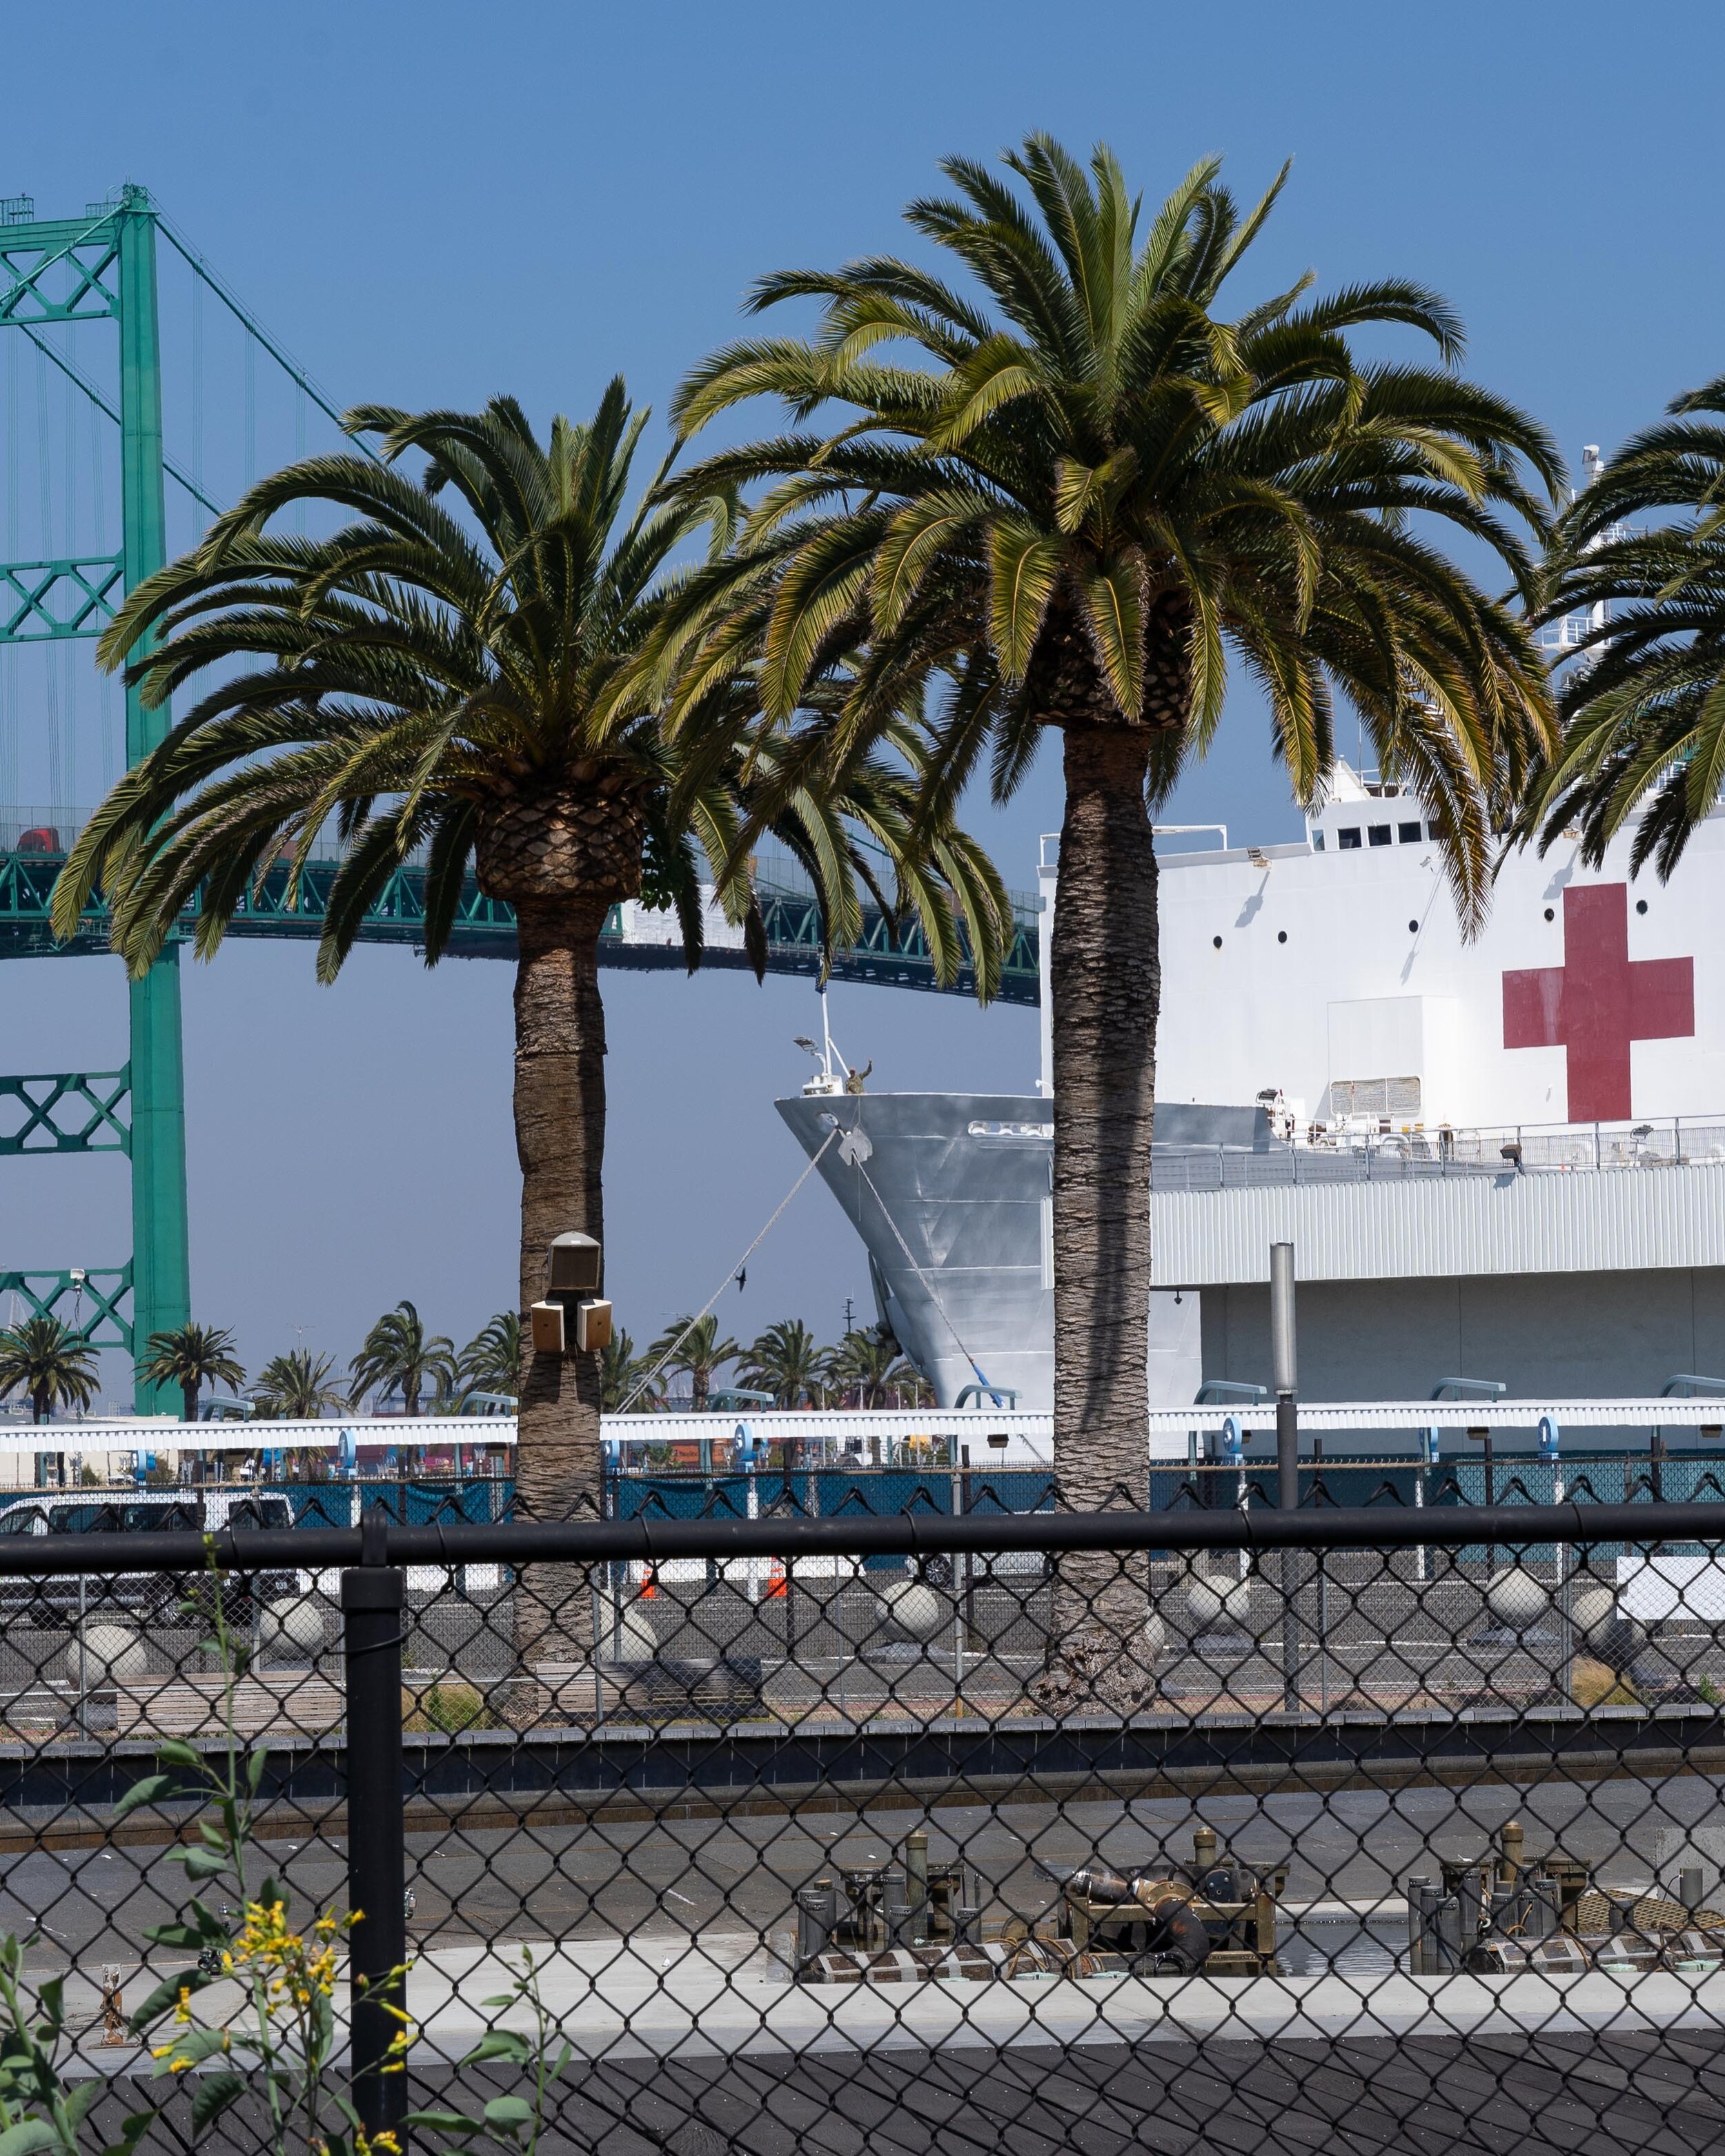  “Lieutenant Patrick Marsh. 16 years of Naval service. ER Nurse managing the Casualty Receiving Department on the USNS Mercy Hospital ship in LA responding to the current COVID 19 pandemic.” - Patrick | 04/30/20 (Los Angeles, CA) 